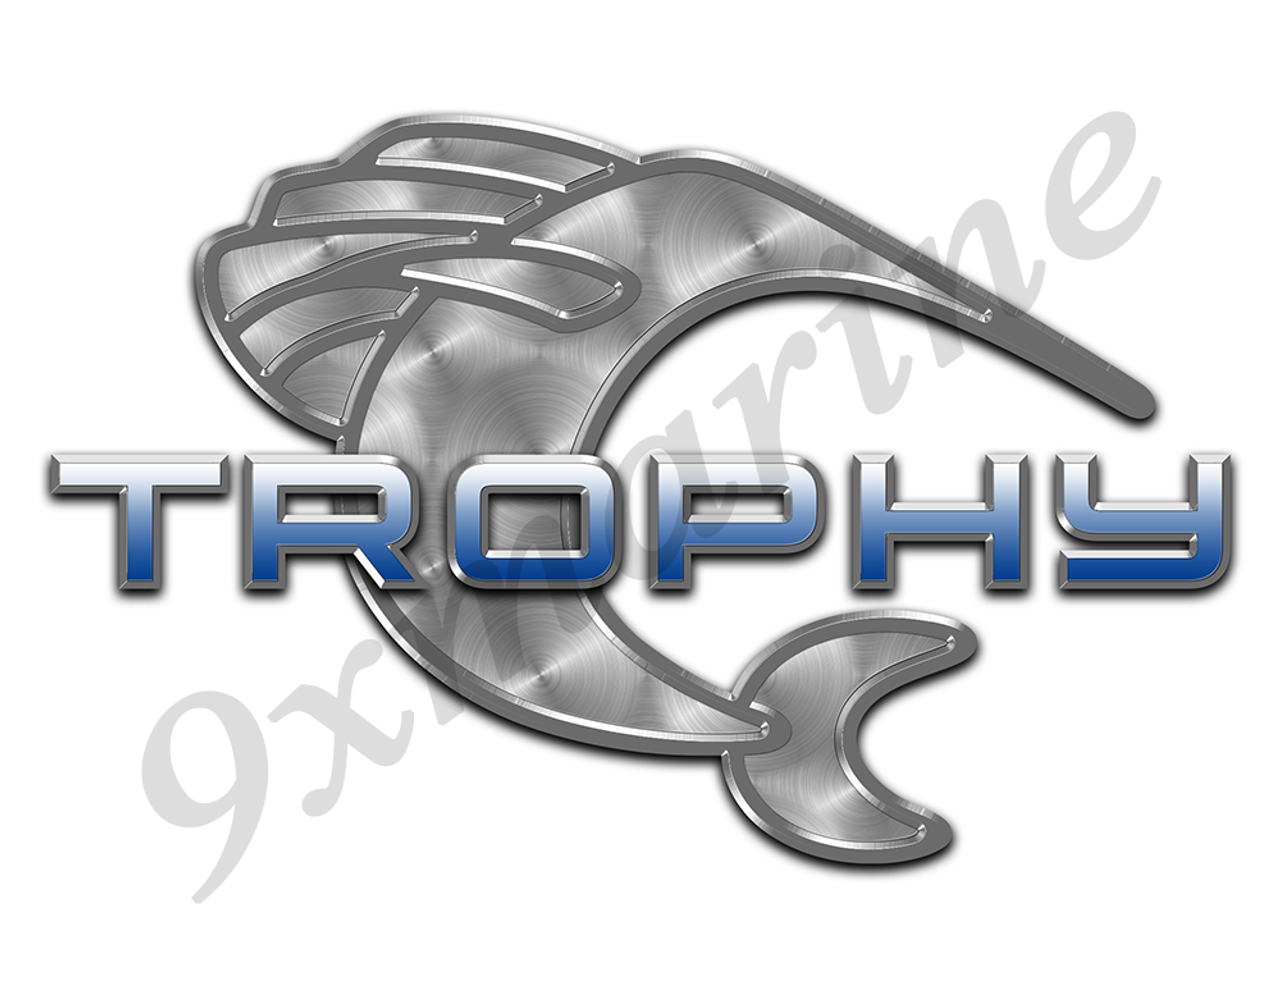 Trophy Remastered Sticker. Brushed Metal Style - 10"x6.5"